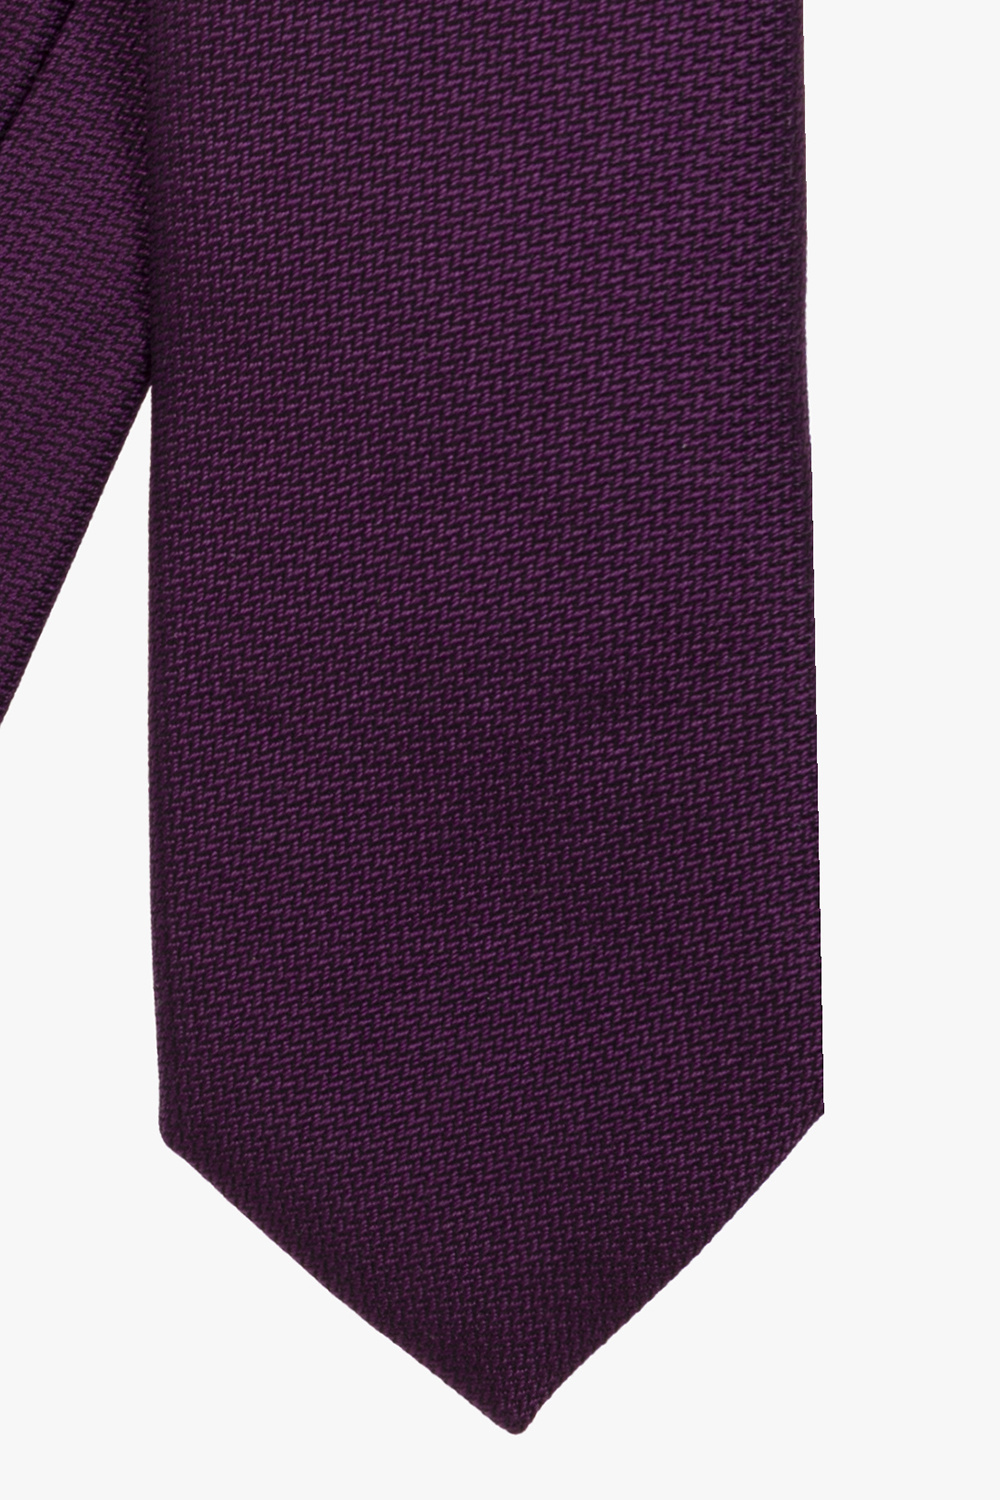 givenchy boilersuit Silk tie